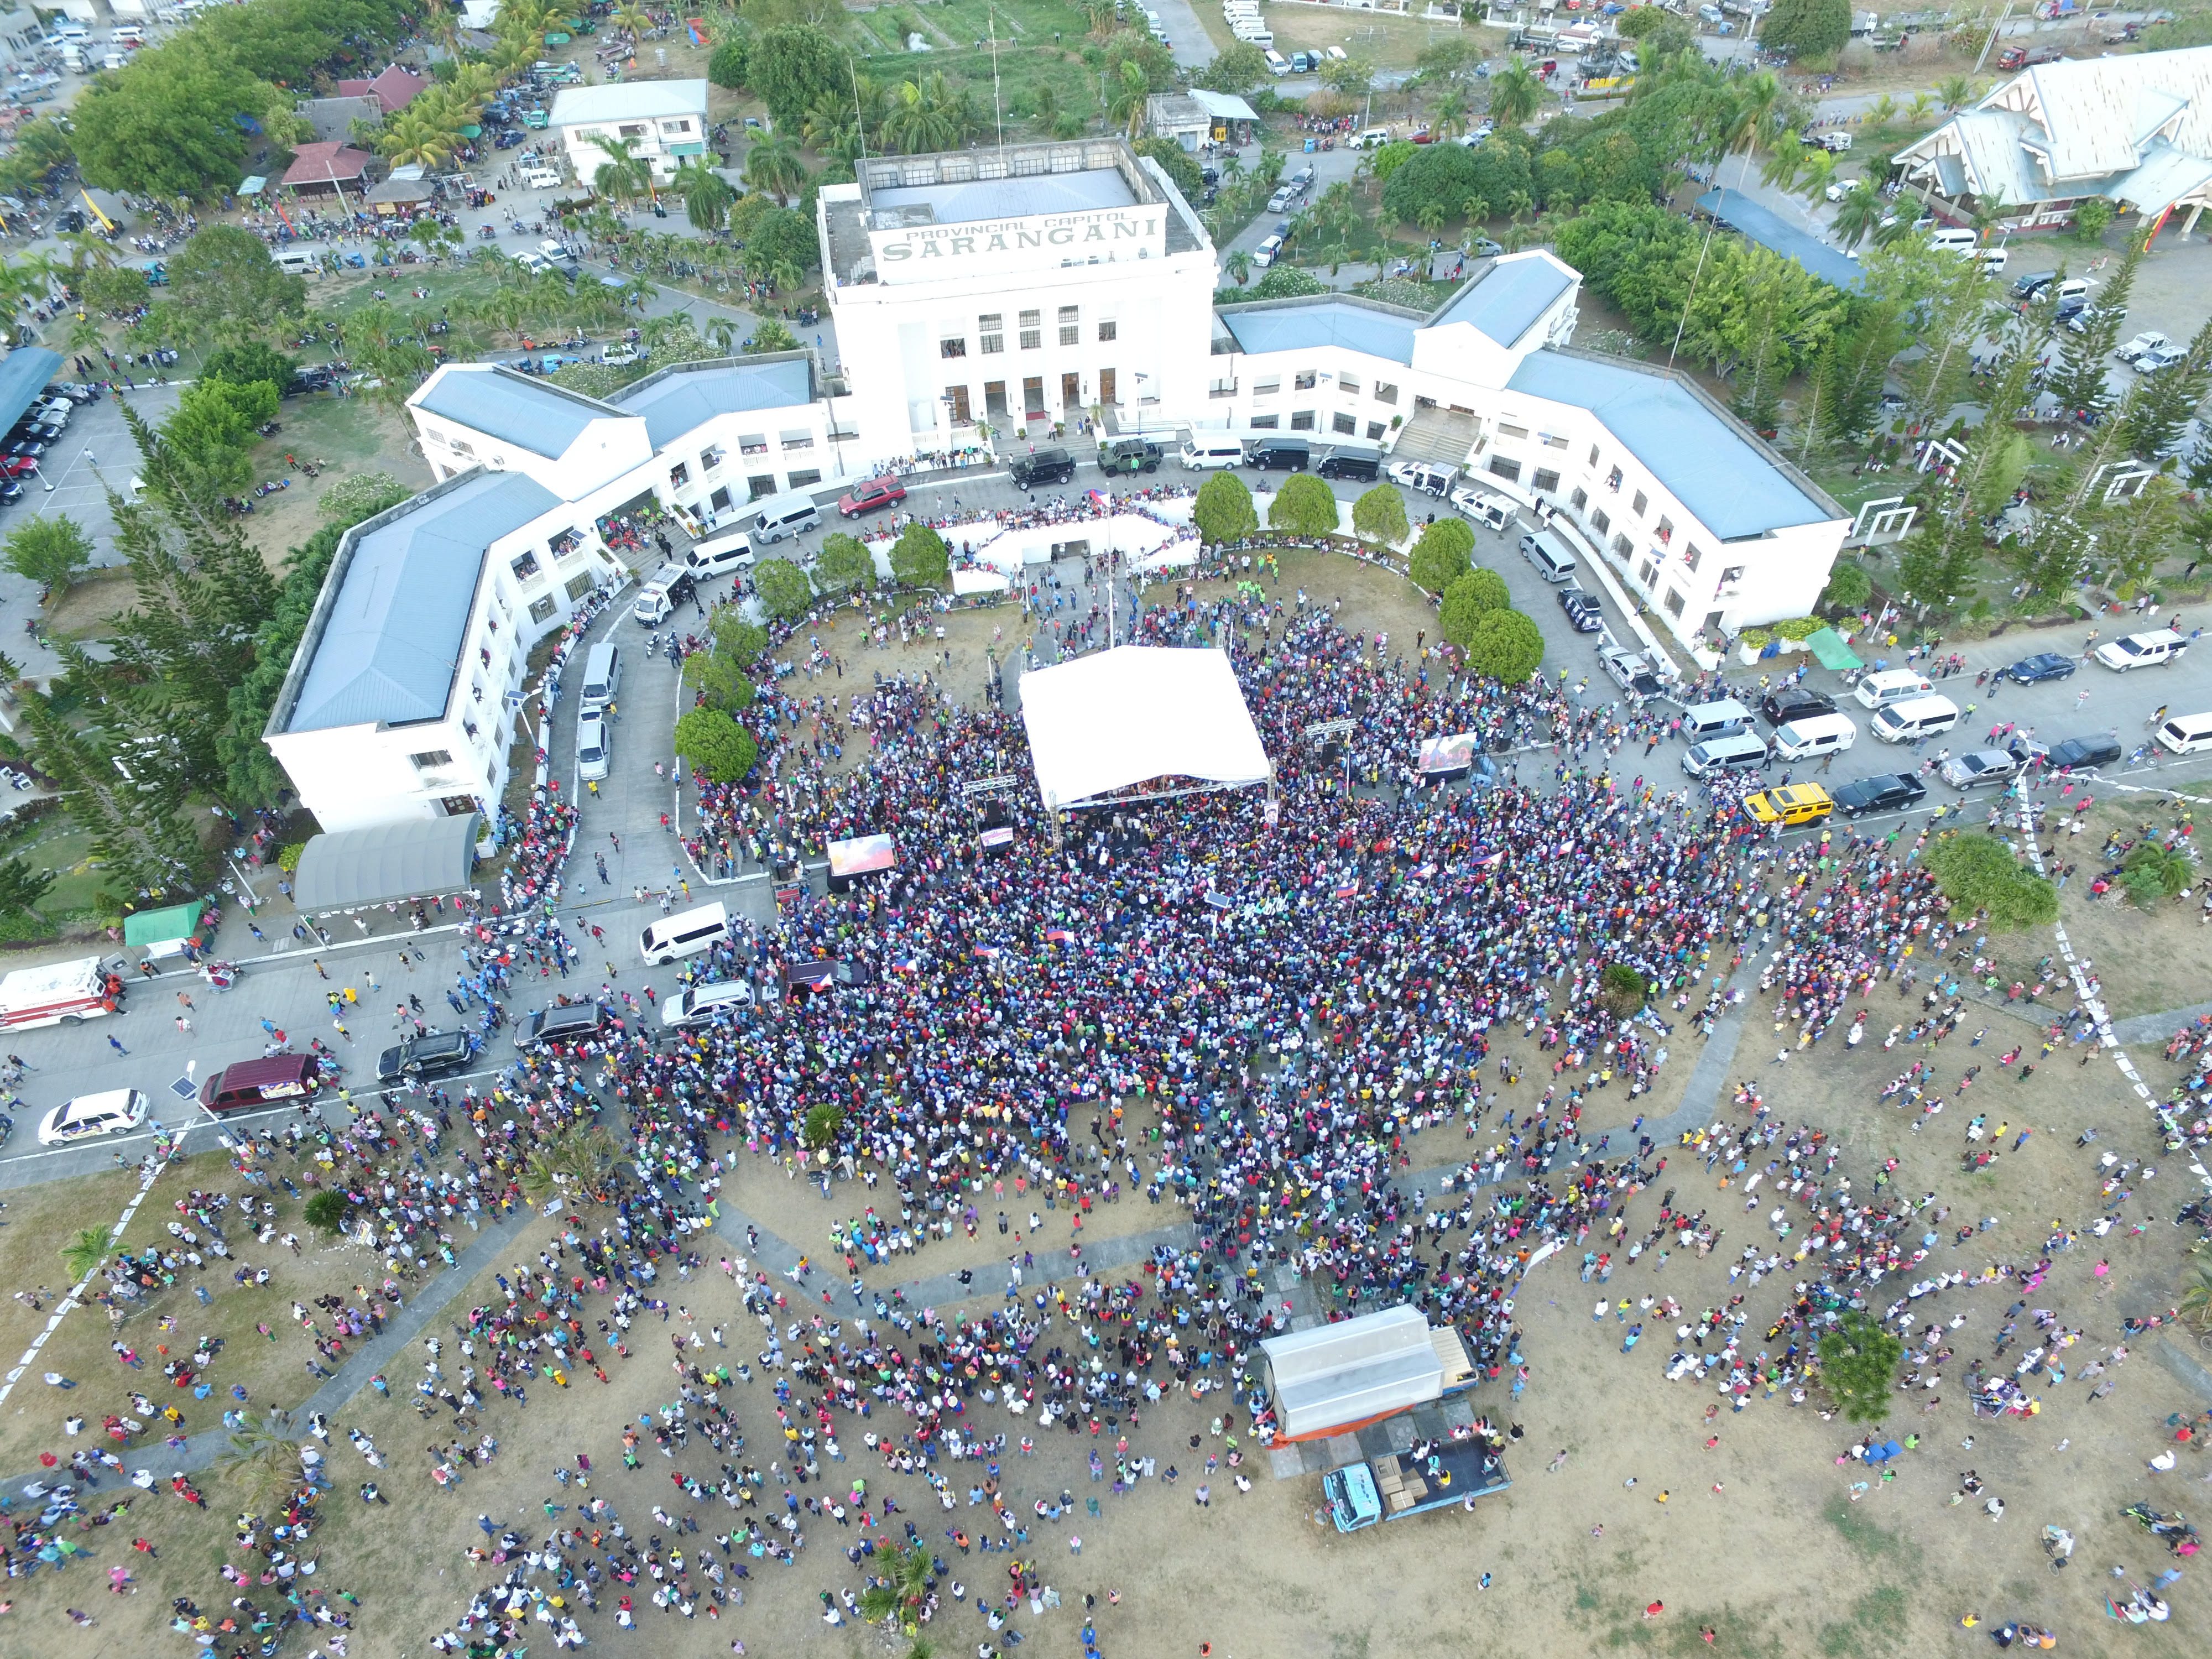 THOUSANDS-STRONG. UNA estimates the crowd in Alabel, Sarangani at 15,000. Photo from the Office of Sarangani Representative Manny Pacquiao 